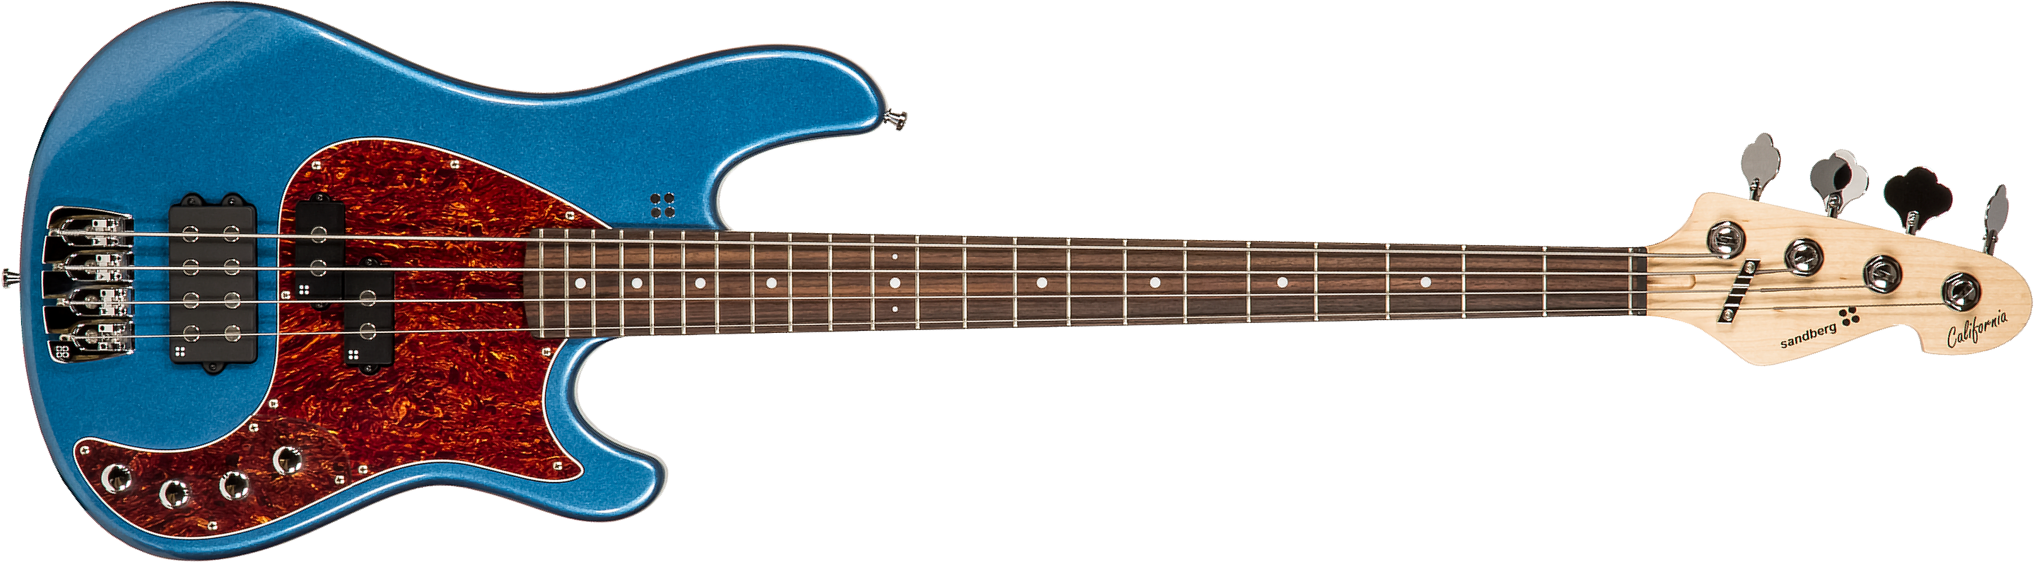 Sandberg California Vm4 White Dots All Active Rw - Lake Placid Blue - Solid body electric bass - Main picture